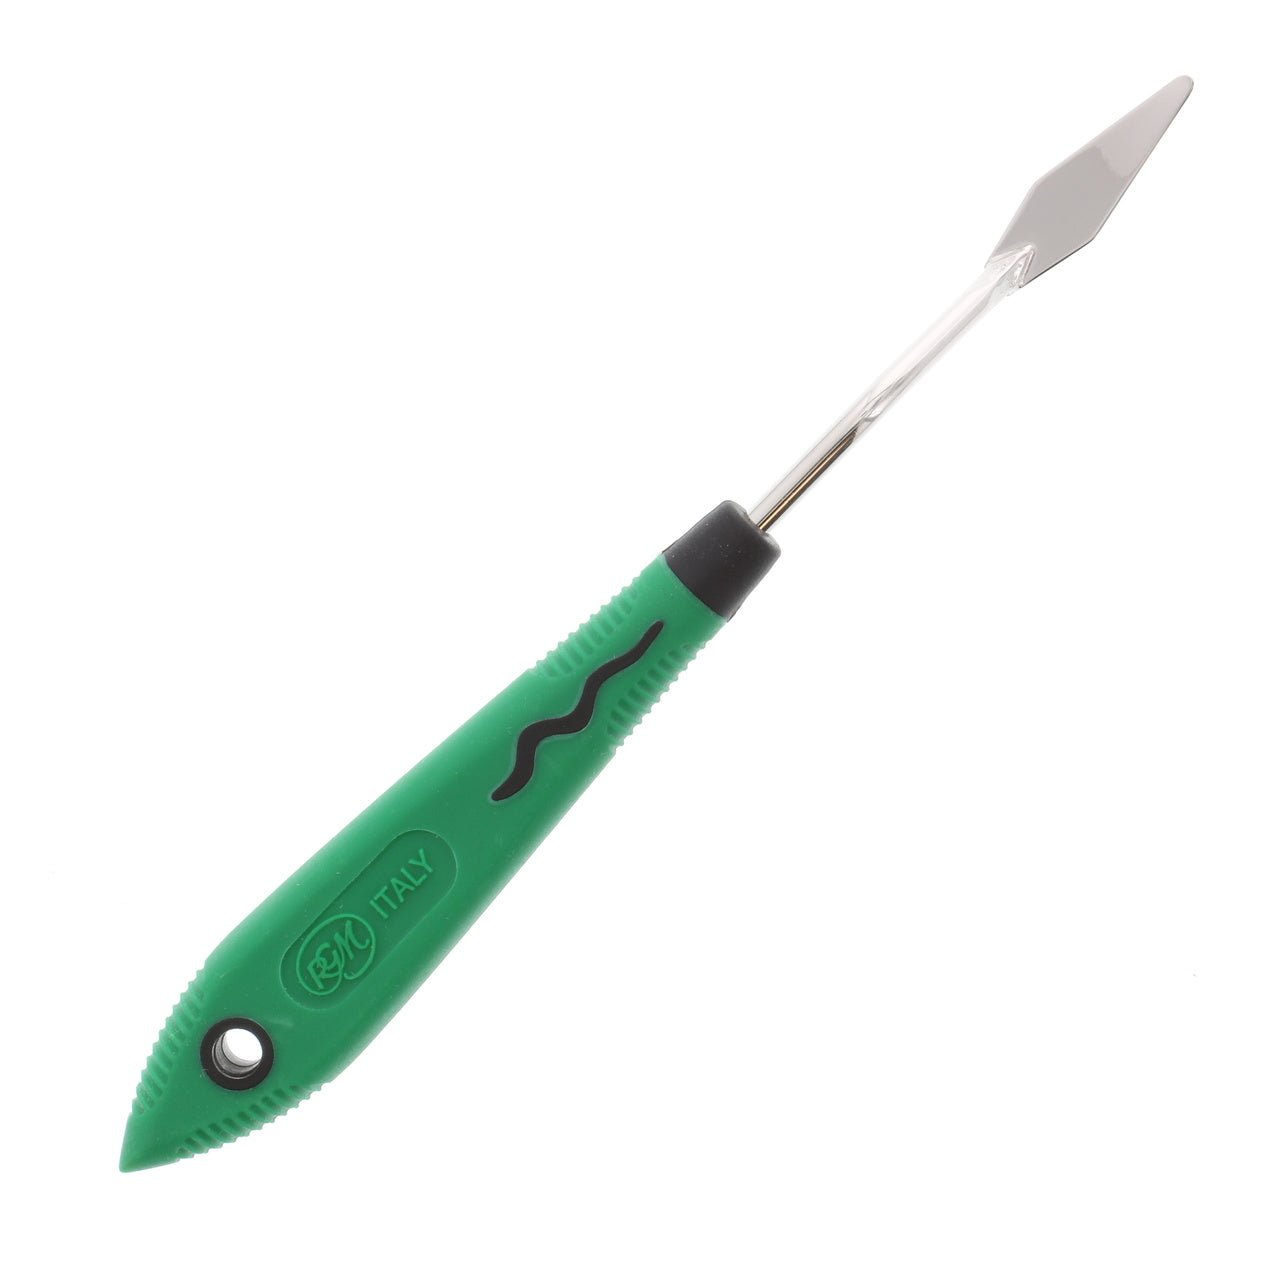 RGM Soft Grip Painting Knife #041 (Green Handle)